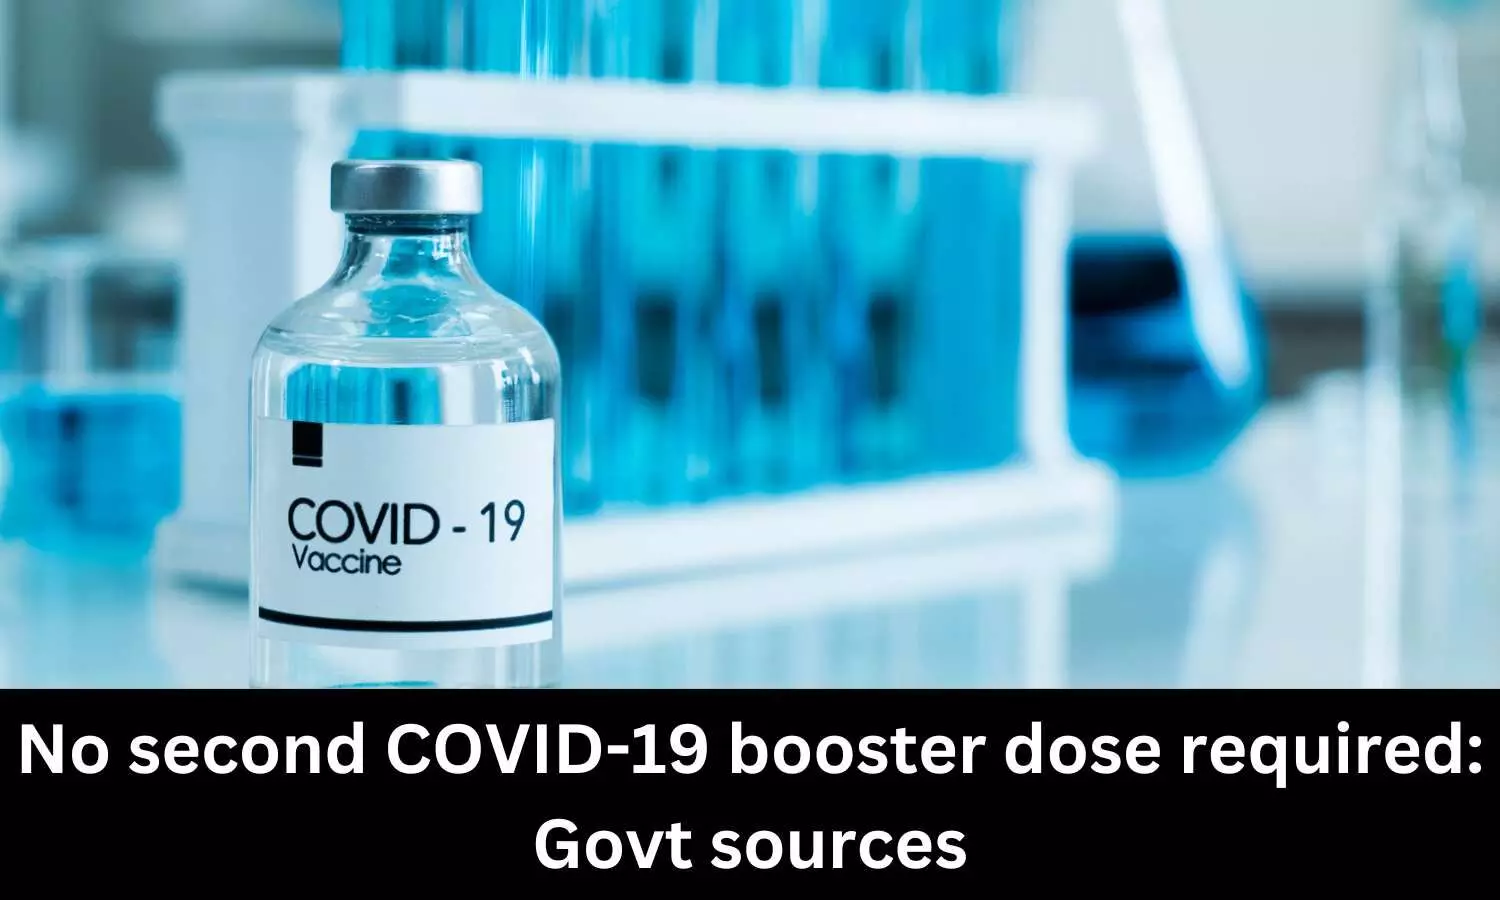 No need for second COVID booster dose: Sources